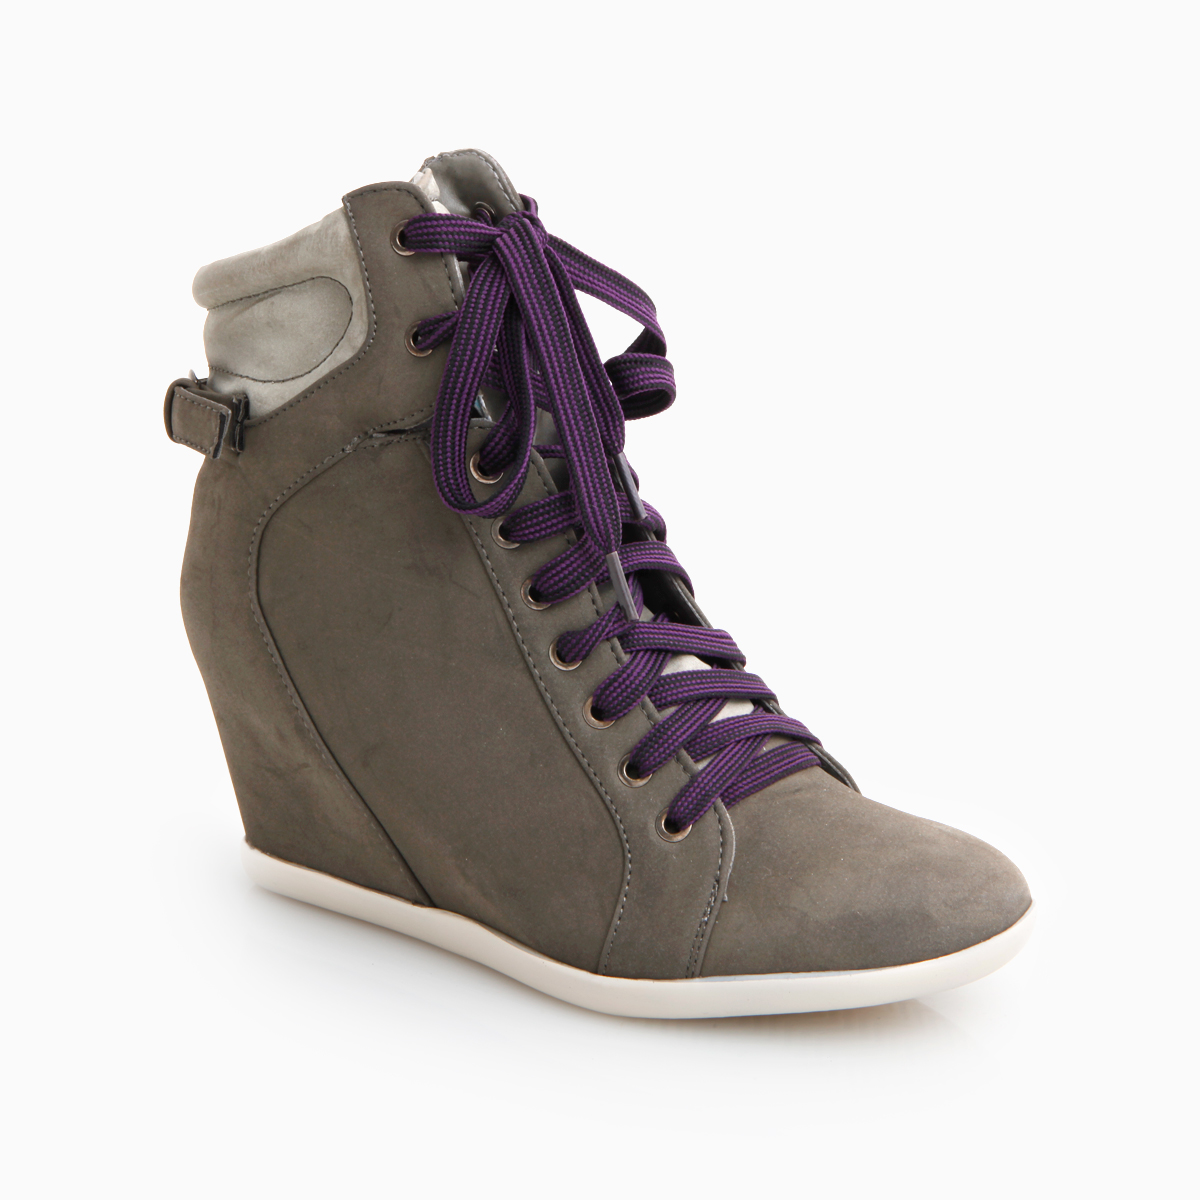 Street Cred Hidden Wedge Sneakers by Bamboo